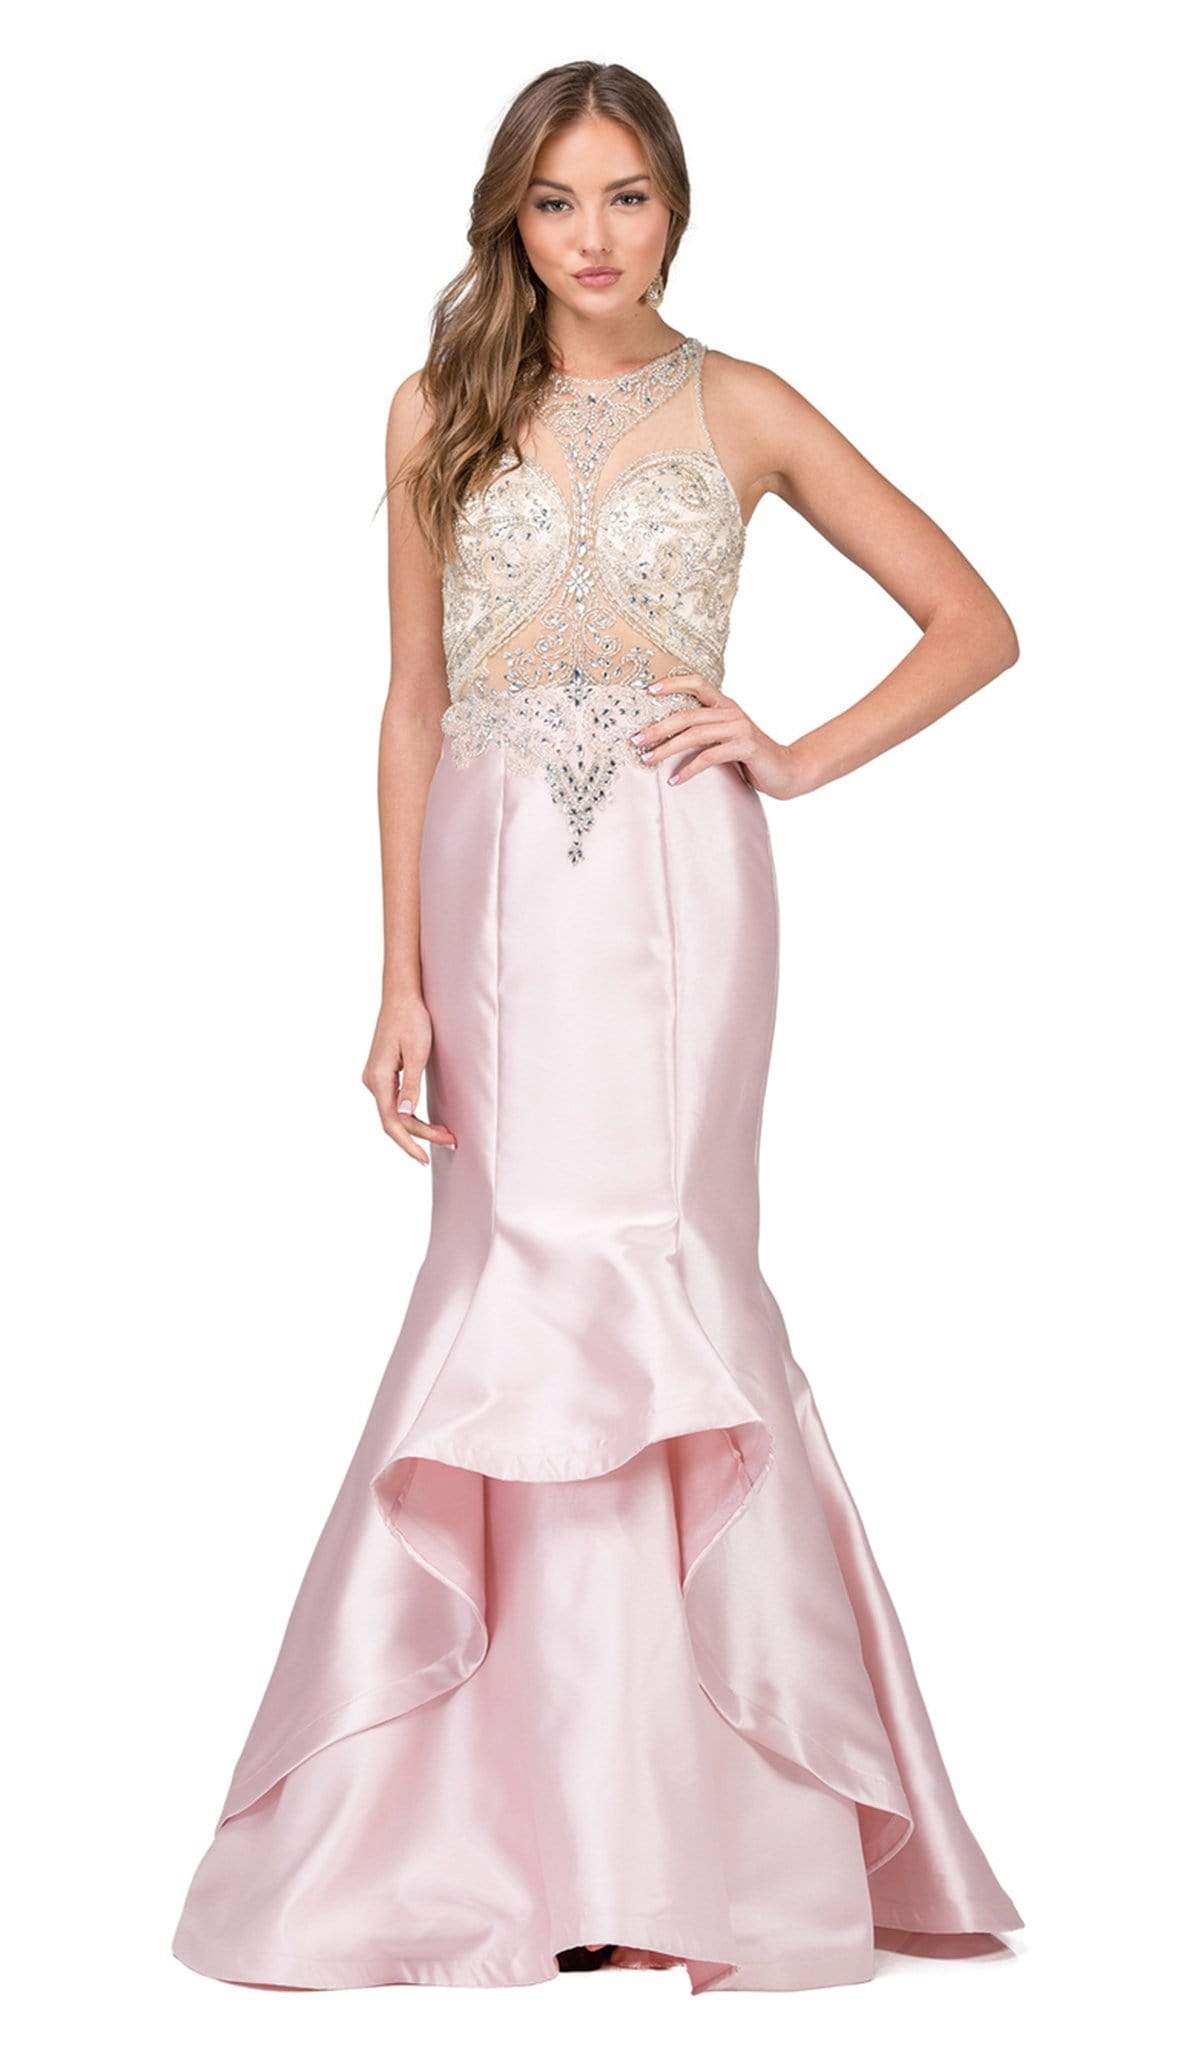 Image of Dancing Queen - 9930 Jeweled Illusion Bodice Flounced Mermaid Gown